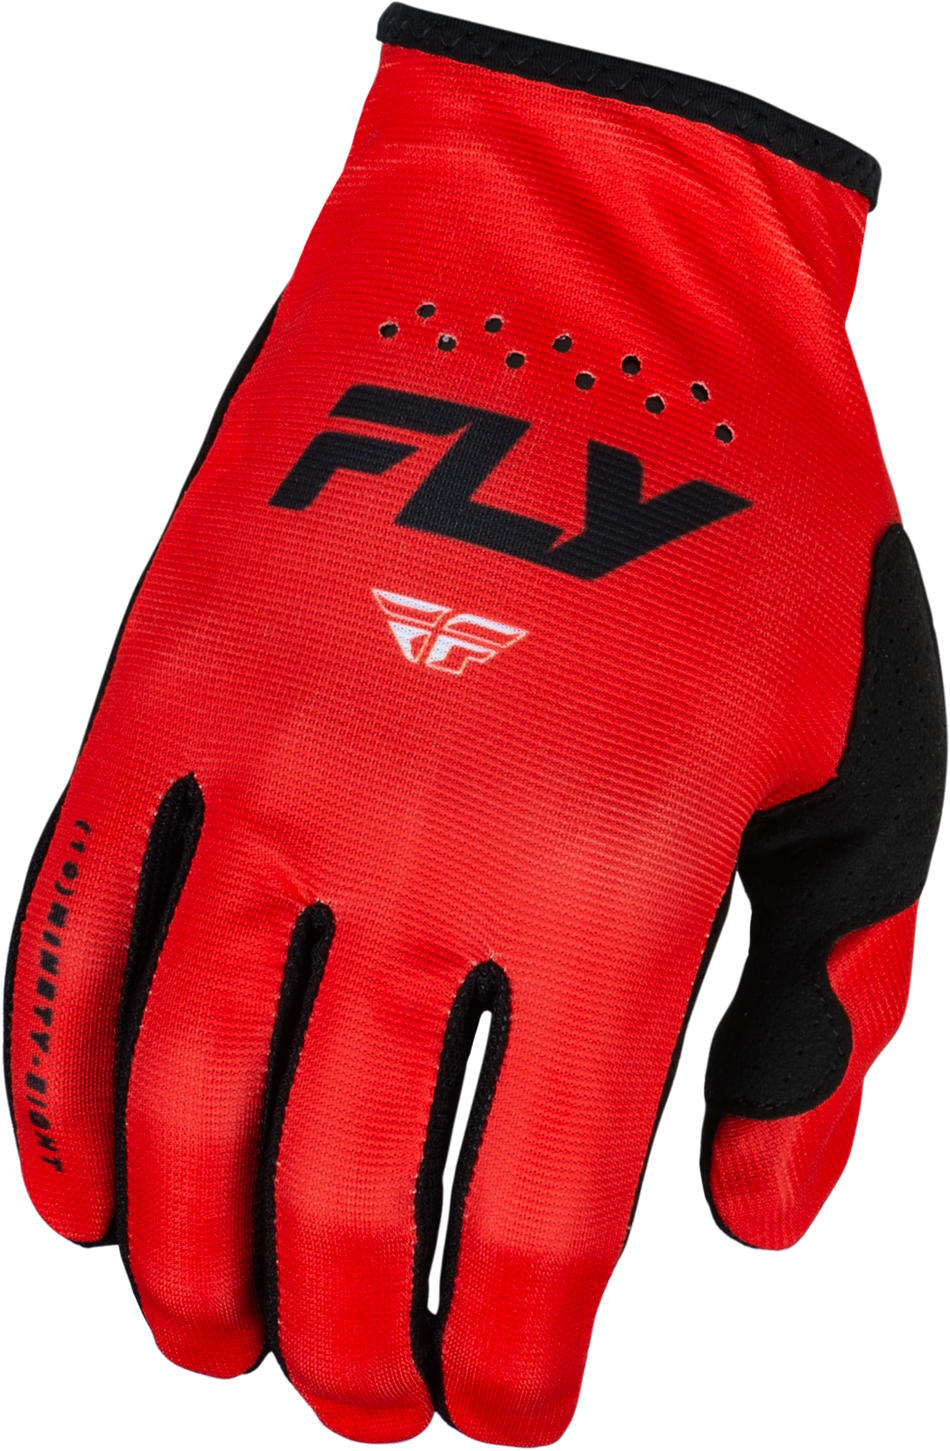 FLY RACING Youth Lite Gloves Red/Black Ys 377-712YS